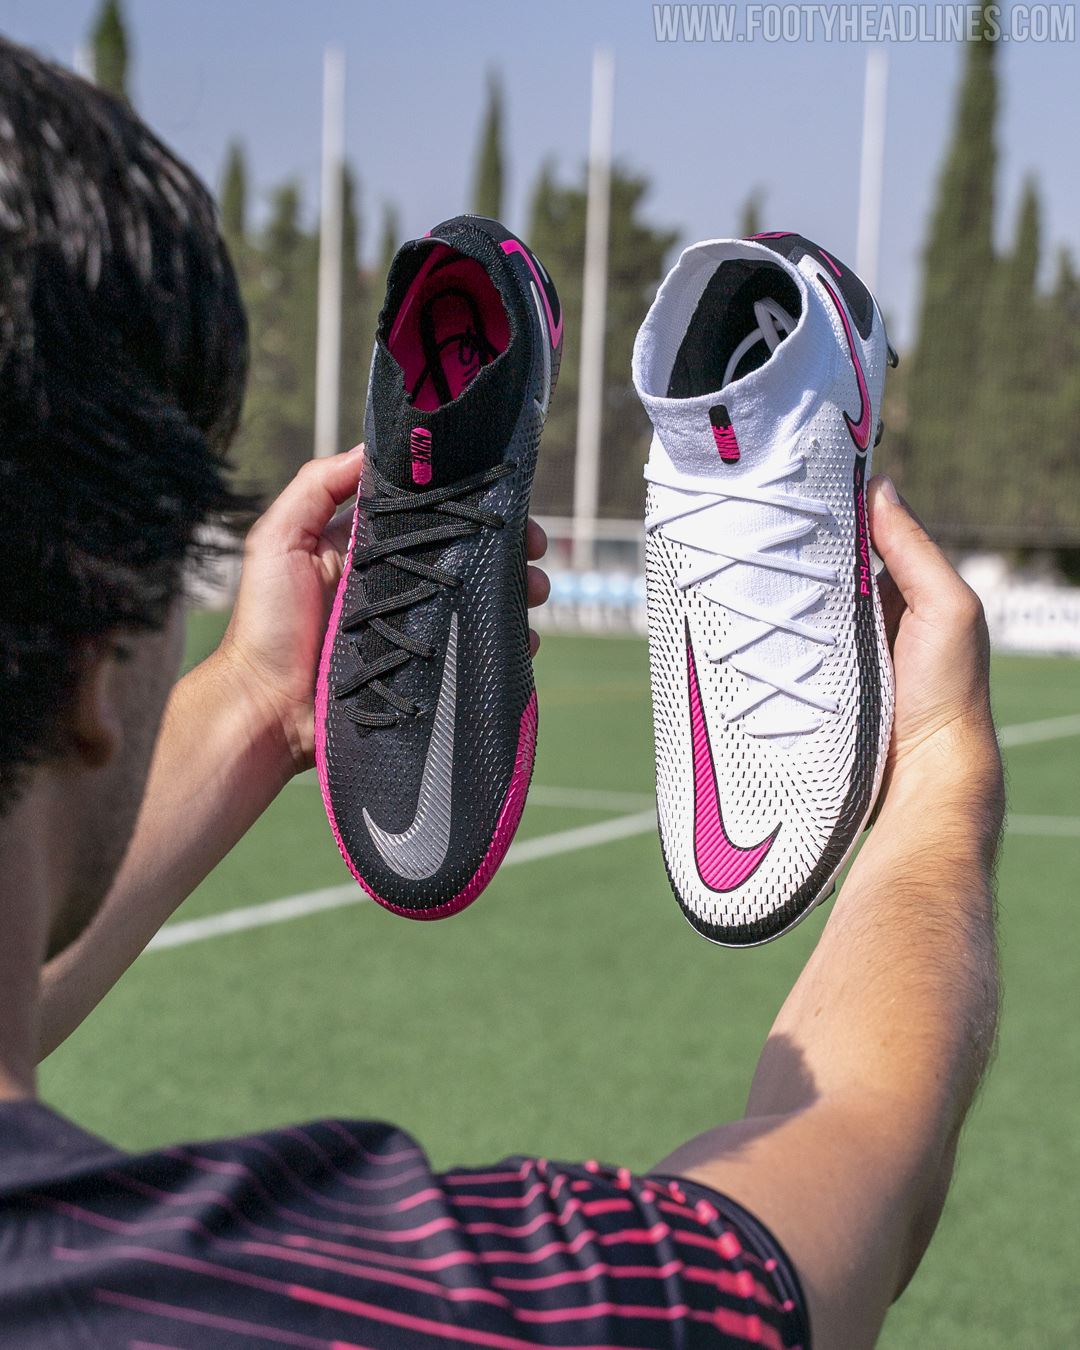 Nike Phantom GT II 'Elite Generation' football boots: Where to buy, price,  release date, and more explored